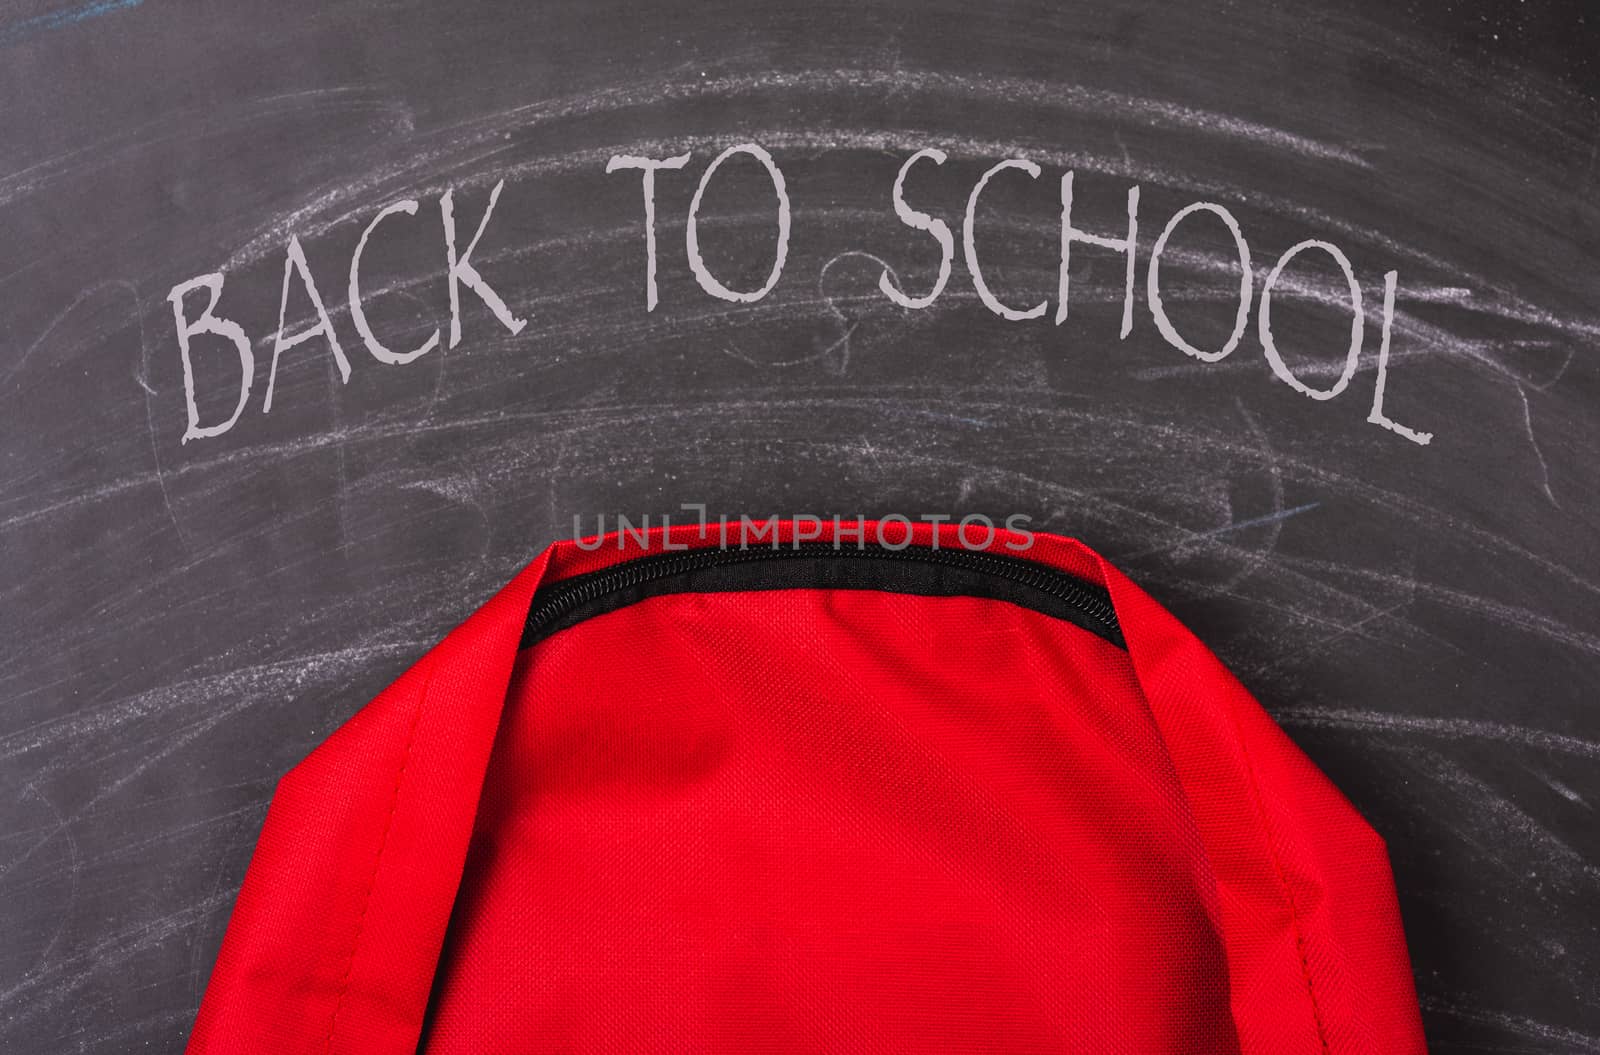 Back to school shopping pocket backpack on the education red bag on blackboard and chalkboard